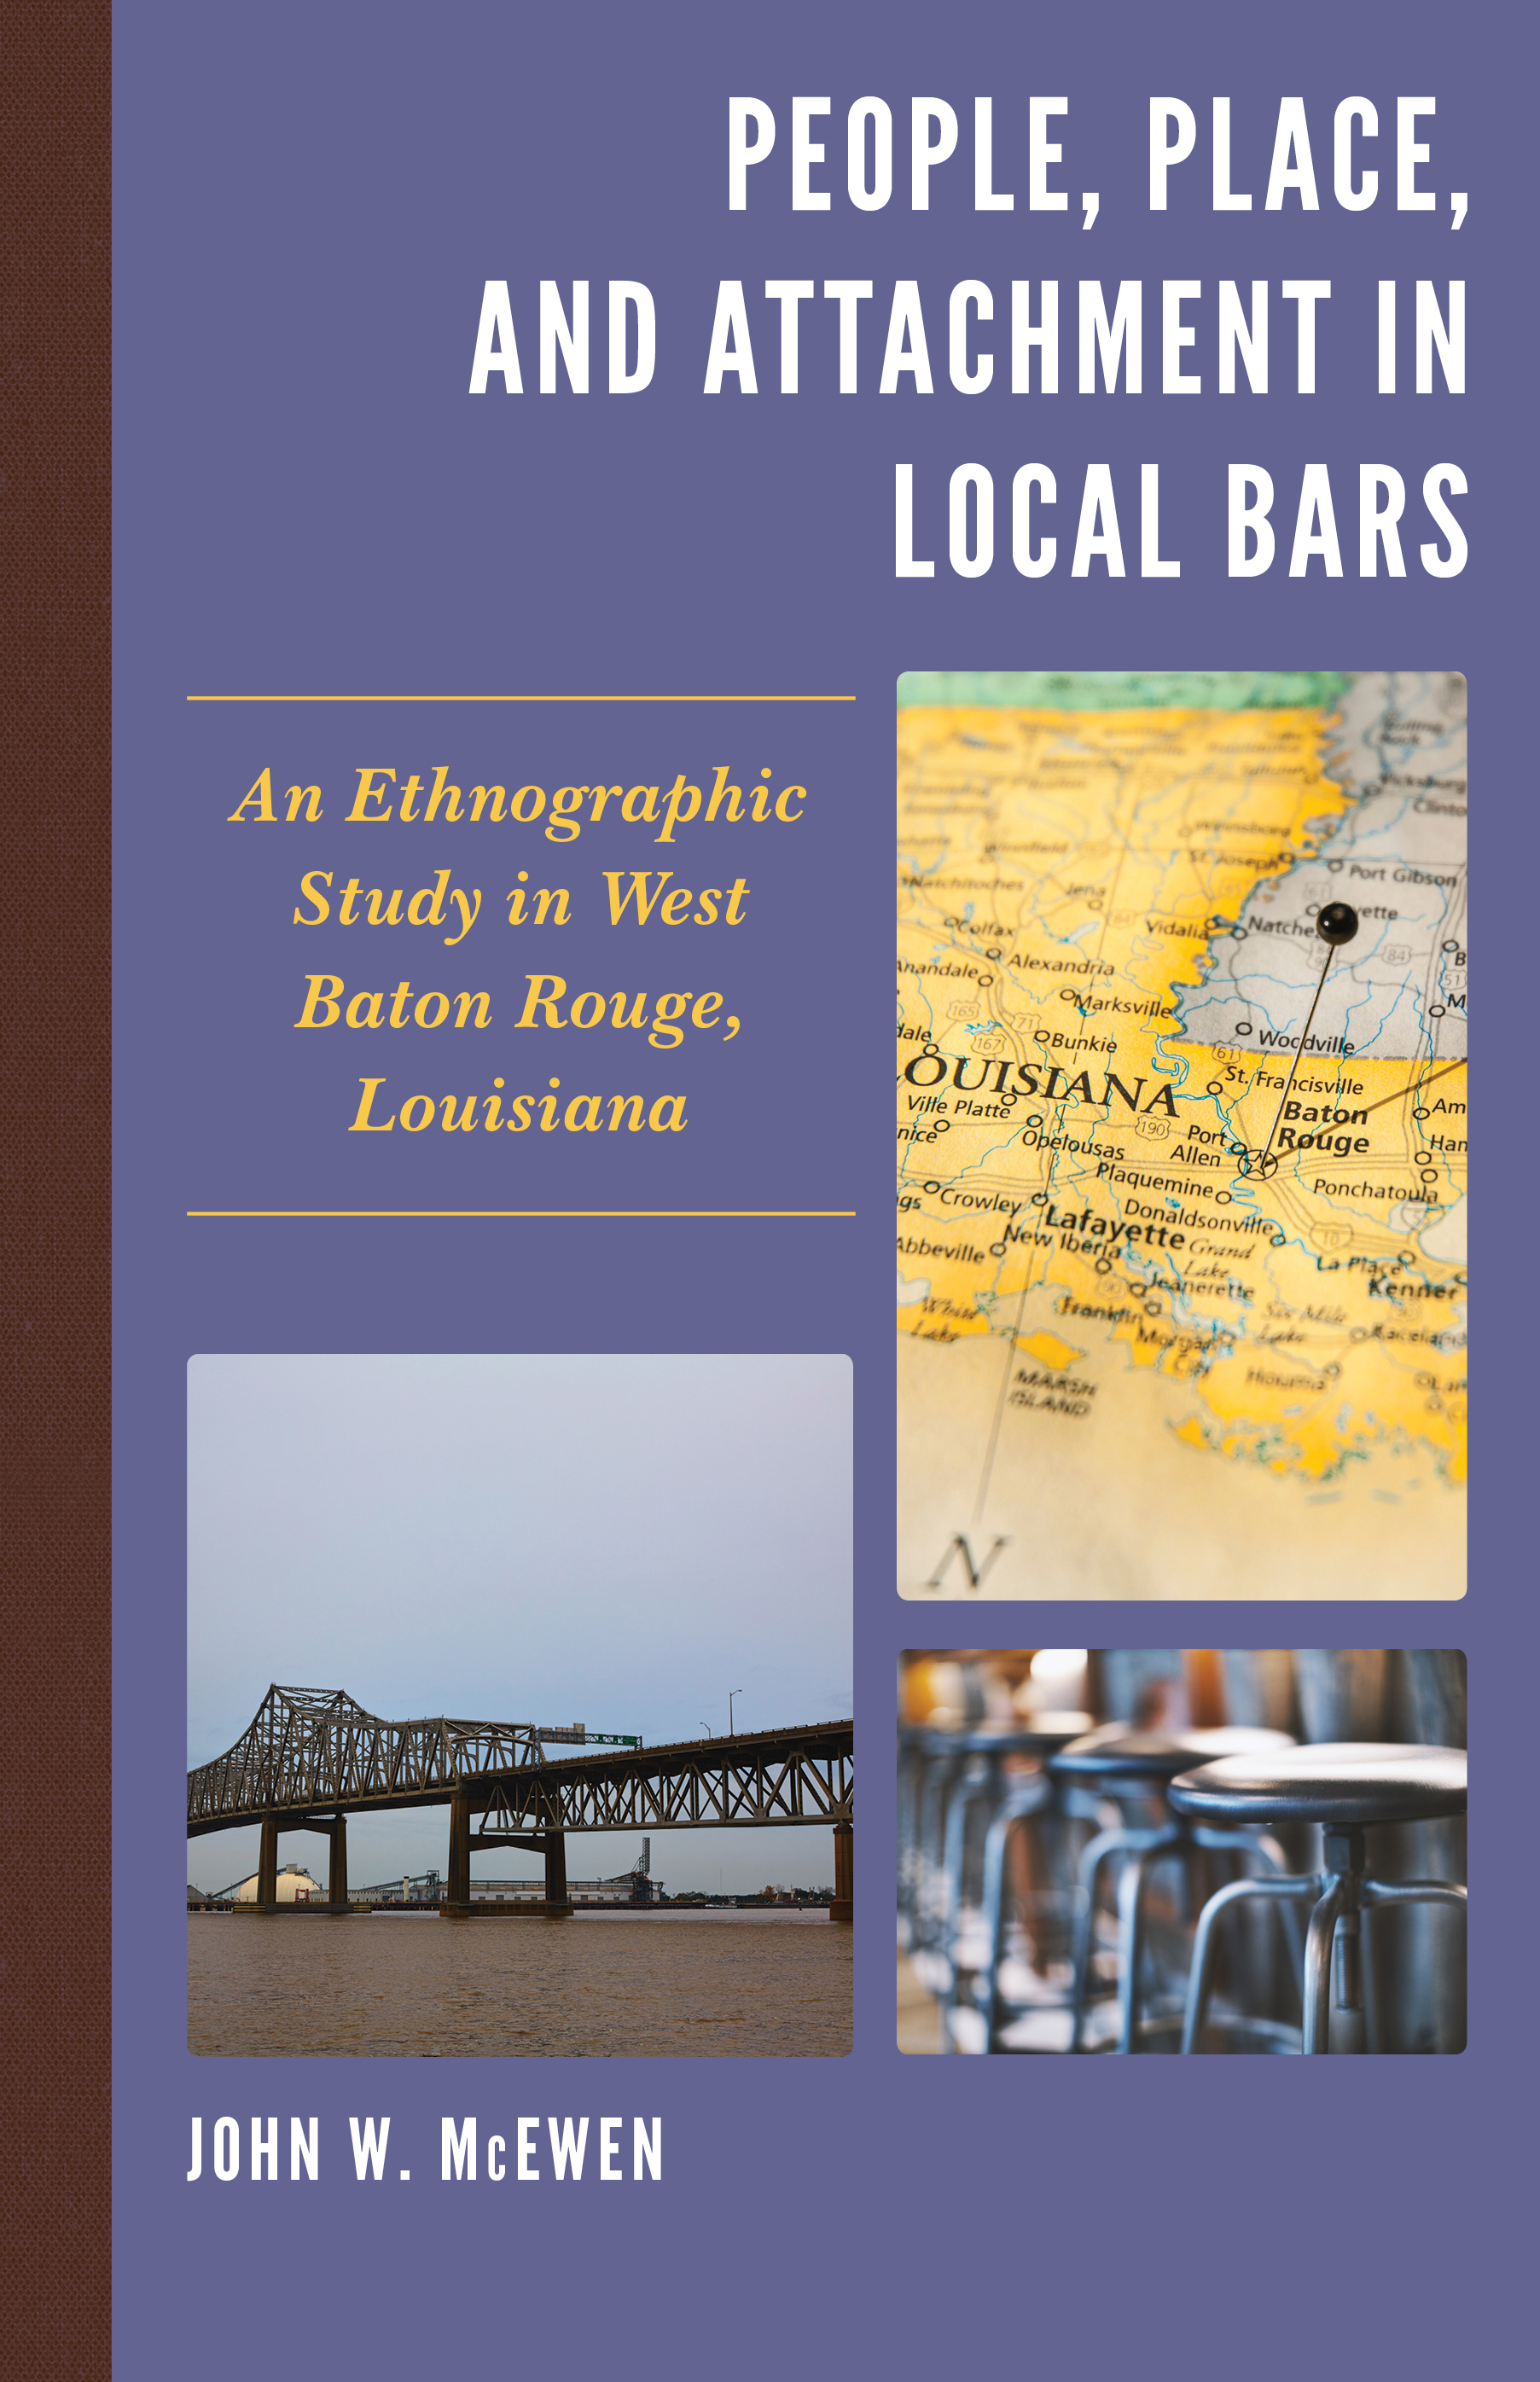 People, Place, and Attachment in Local Bars: An Ethnographic Study in West Baton Rouge, Louisiana